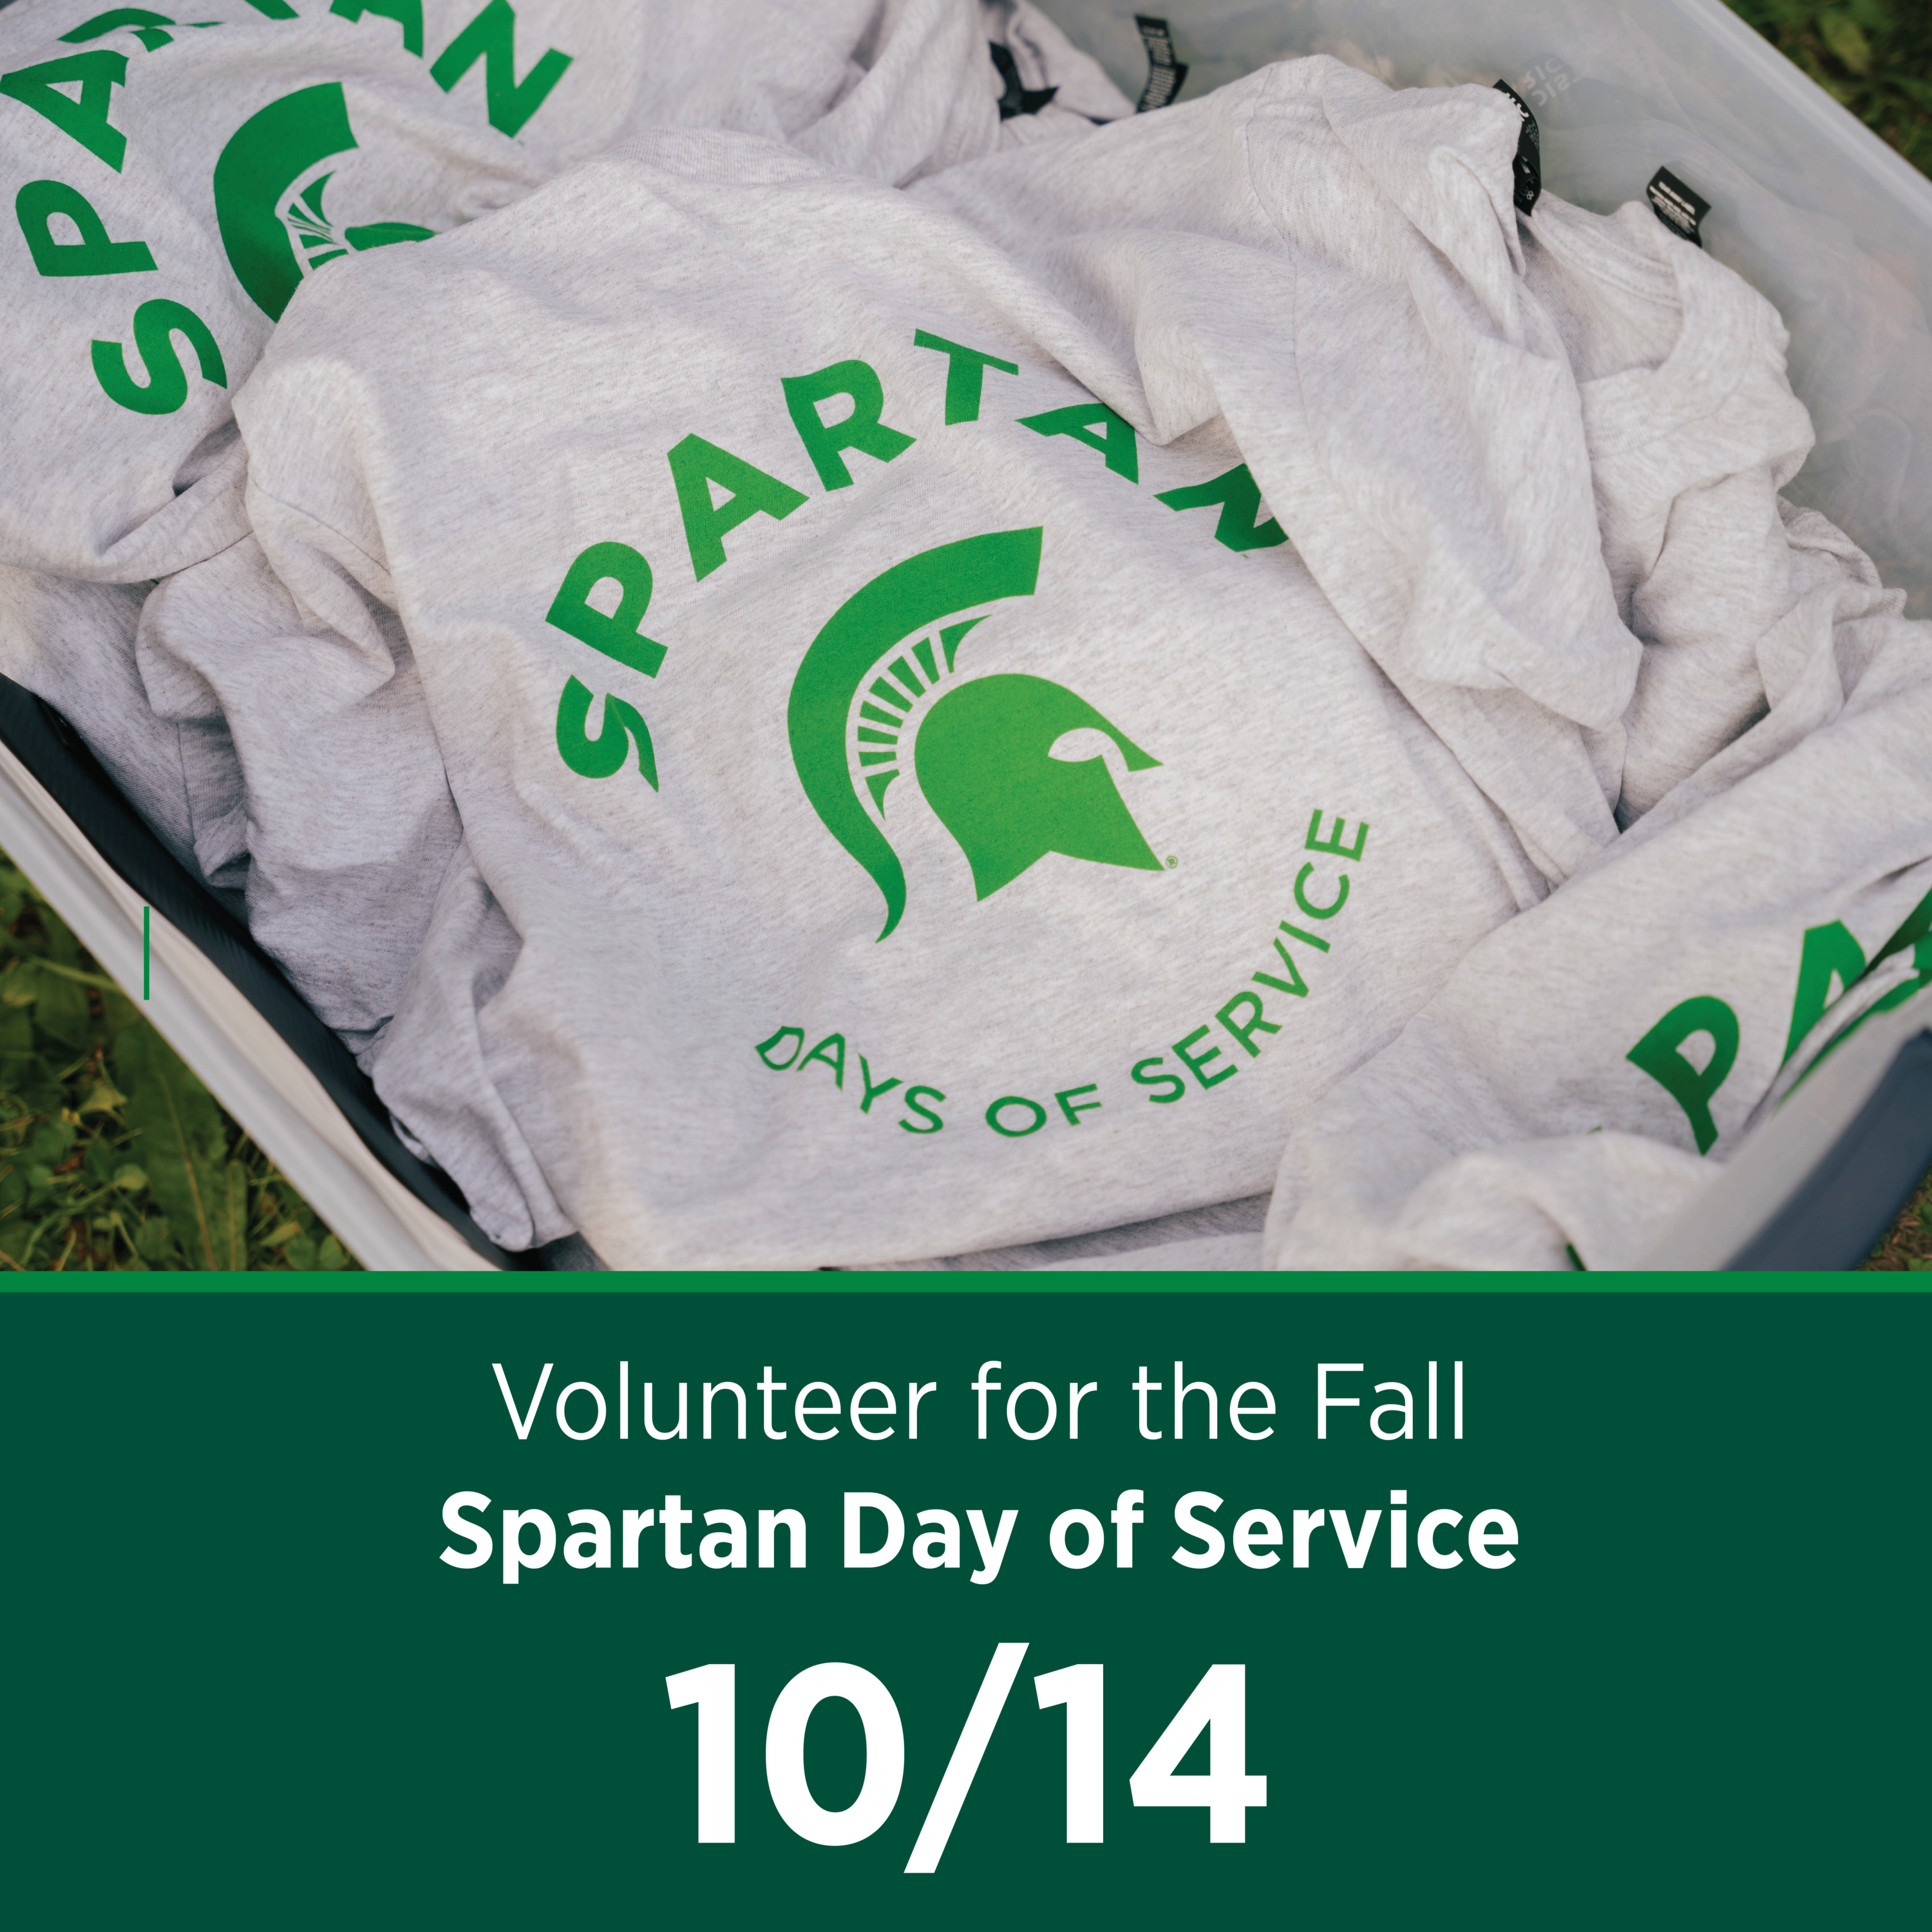 White t-shirts with the words Spartan Days of Service in green, next to a green box saying Spartan Day of Service 10/14.